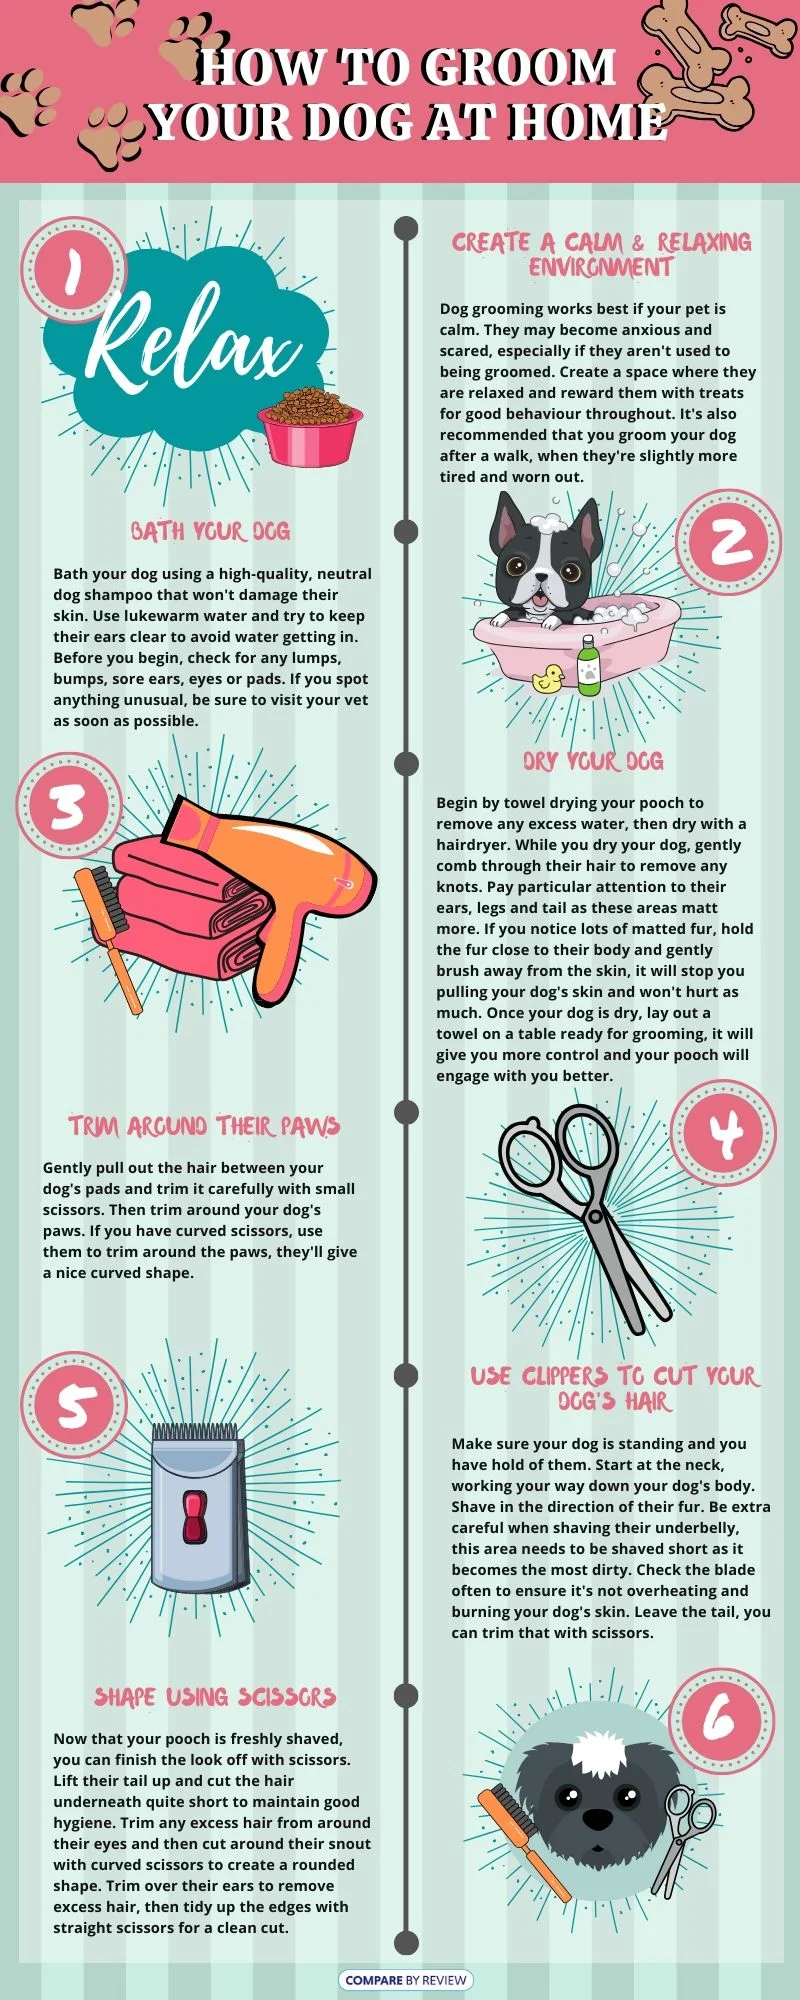 How to groom your dog infographic